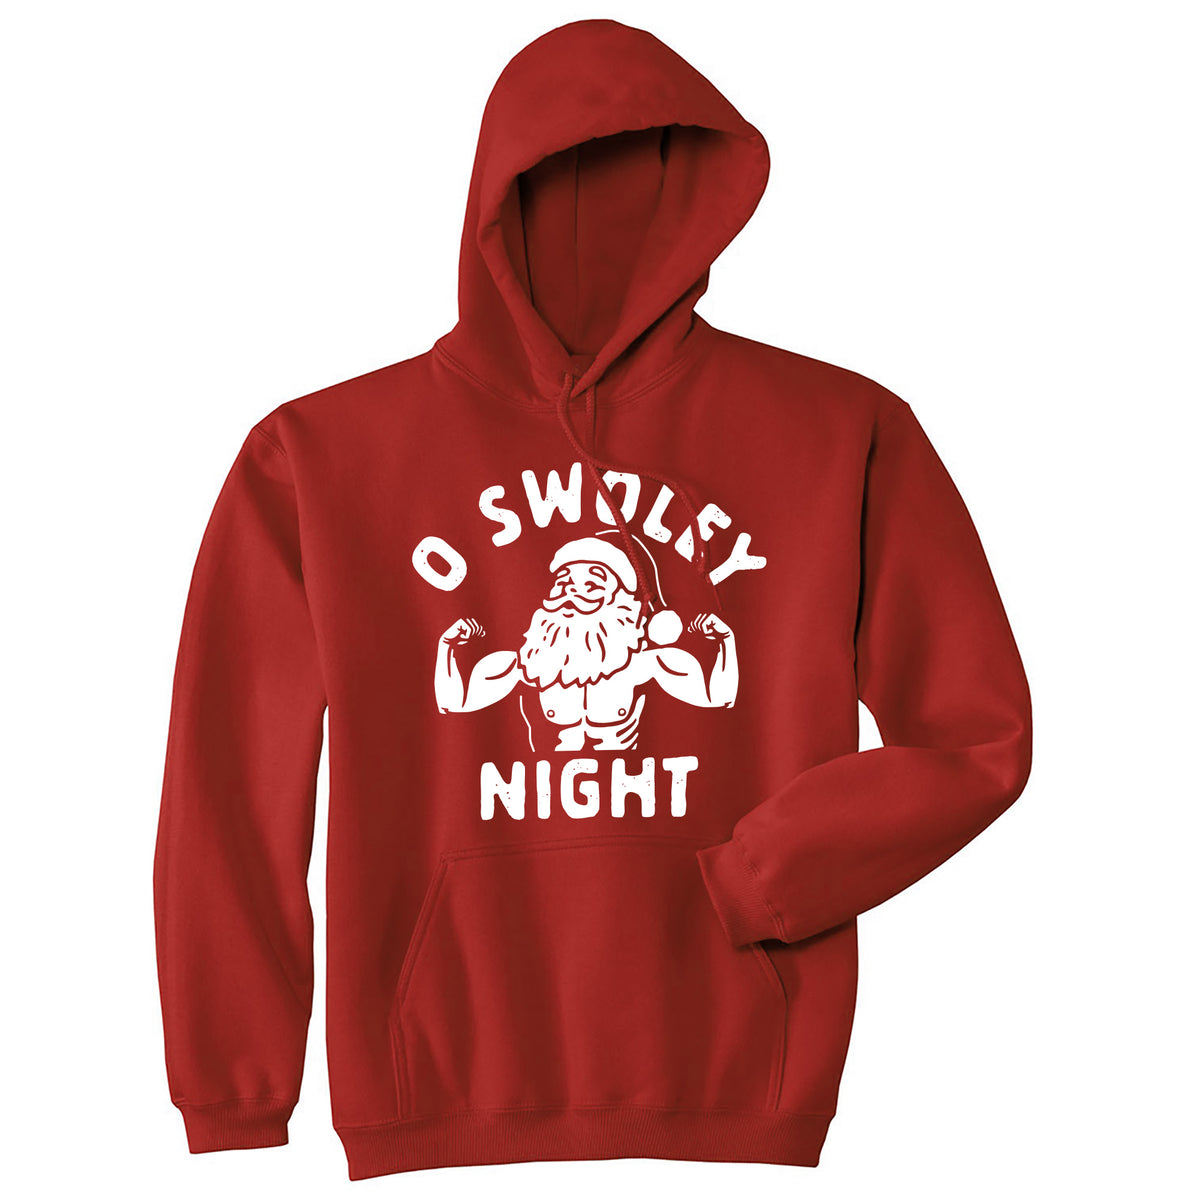 Funny Red - Swoley Night O Swoley Night Hoodie Nerdy Christmas fitness sarcastic Tee